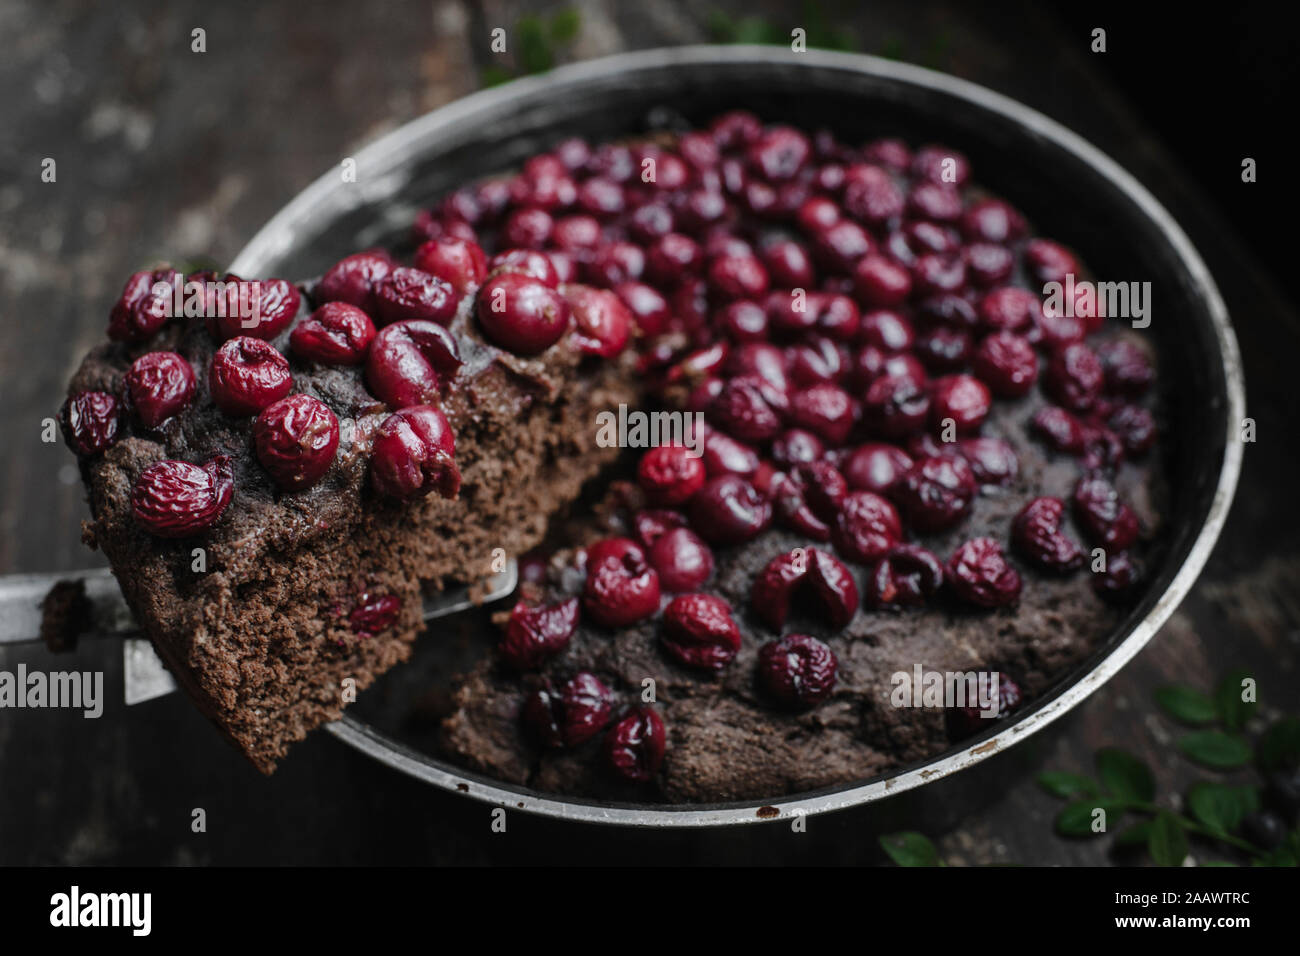 Close-up of cherry brownie pie slice over container on table Stock Photo